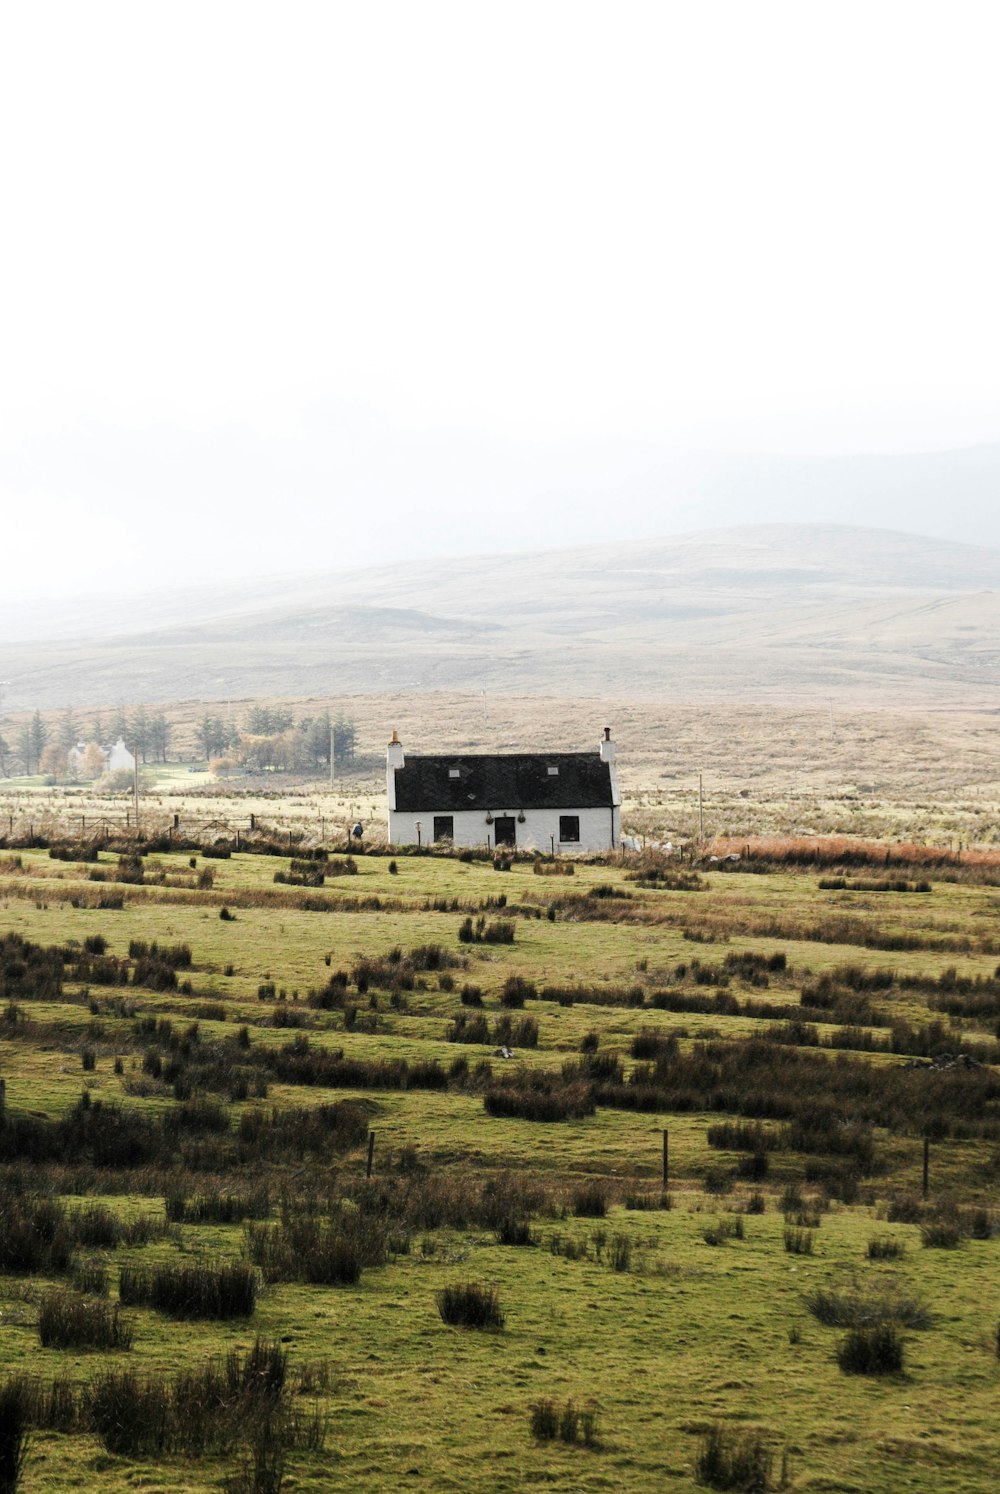 whit and black house in the middle of wide open landscape